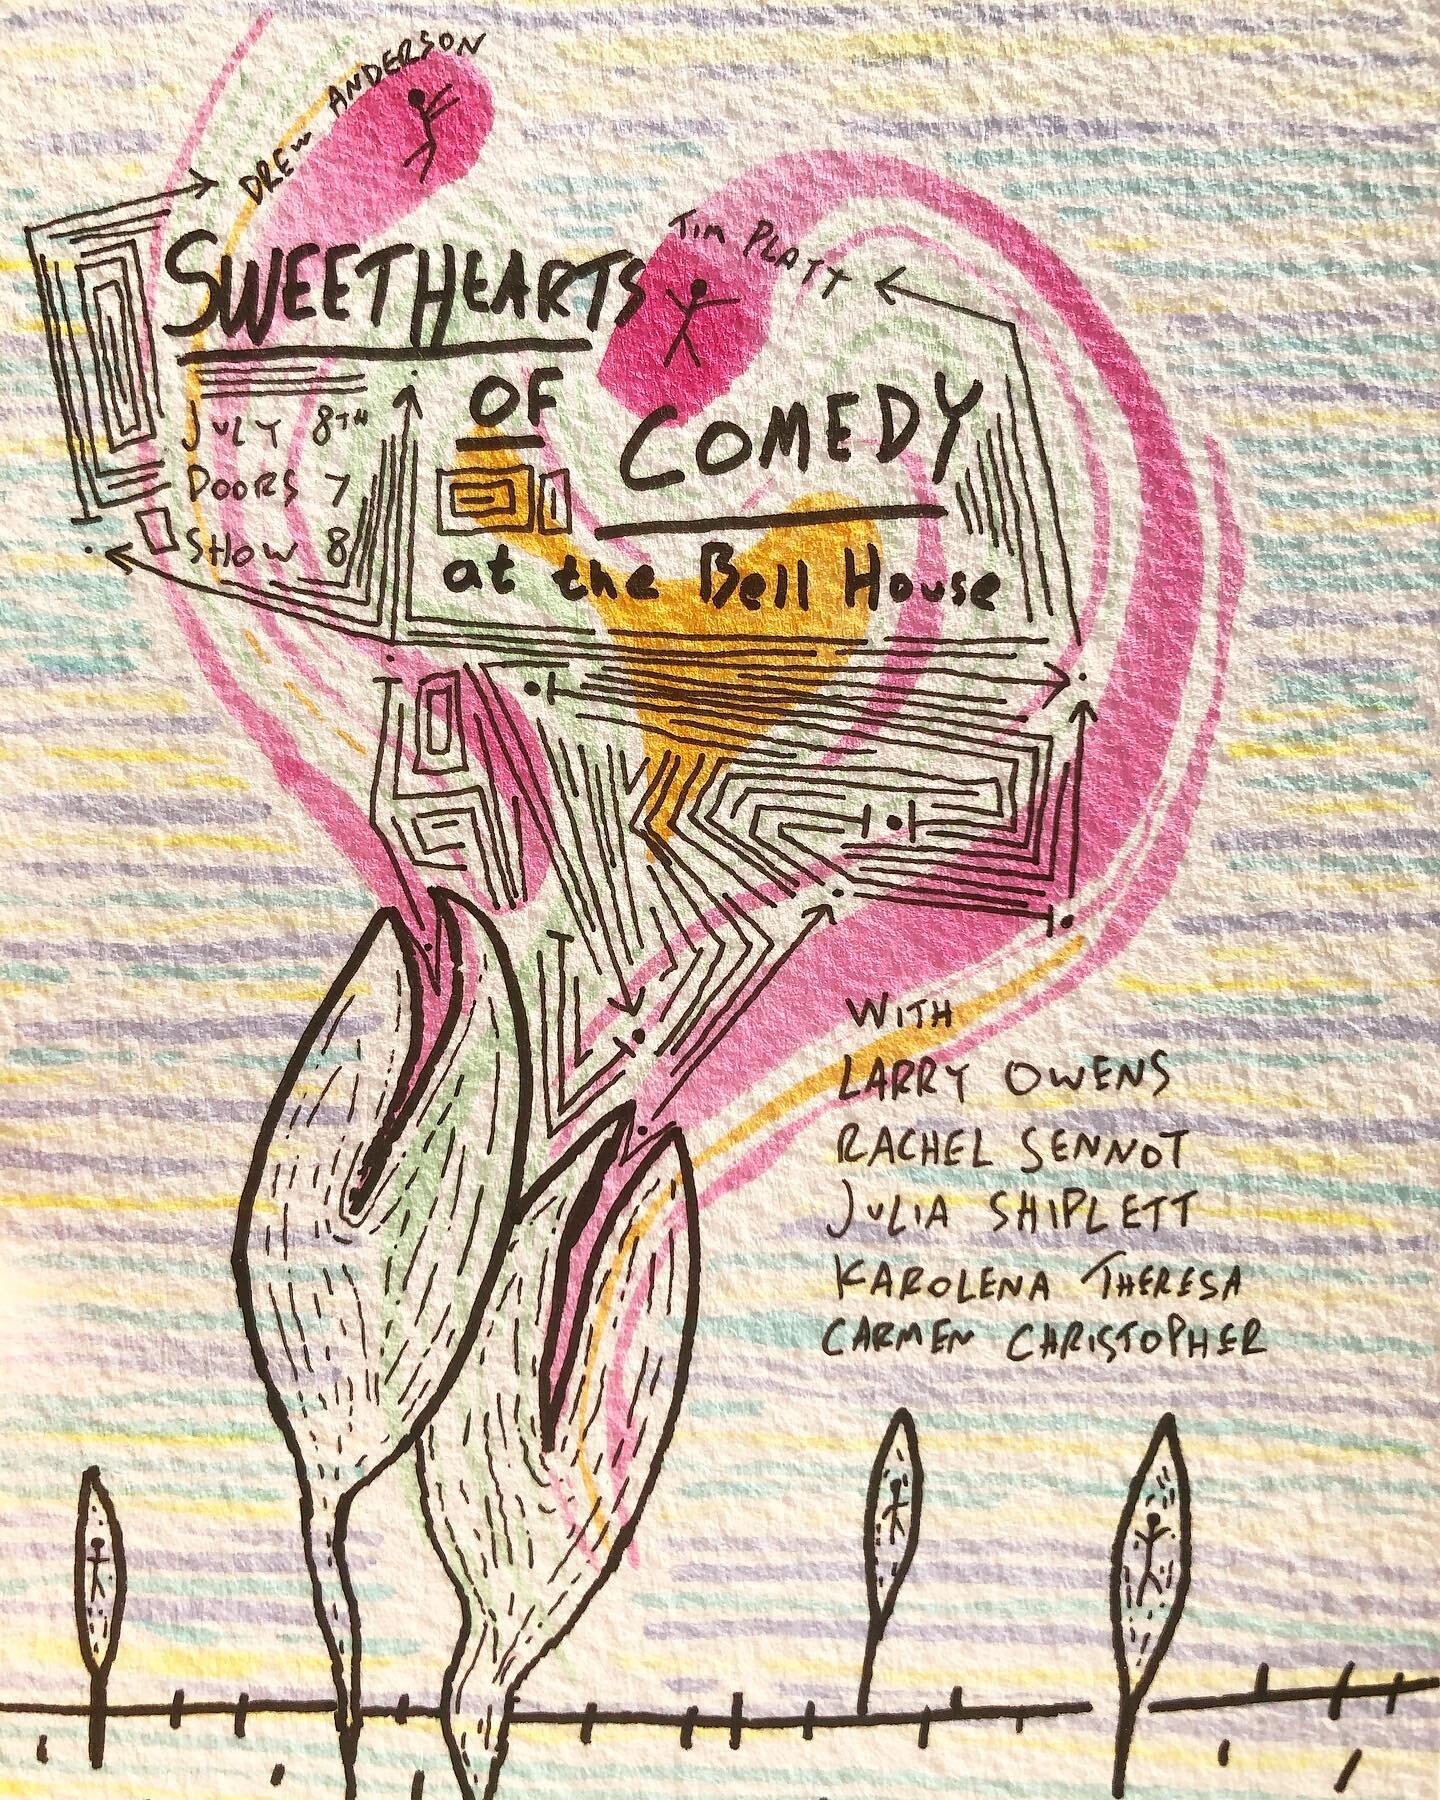 ONE WEEK TILL 
SWEETHEARTS OF COMEDY
at @bellhouseny ! Link in bio!